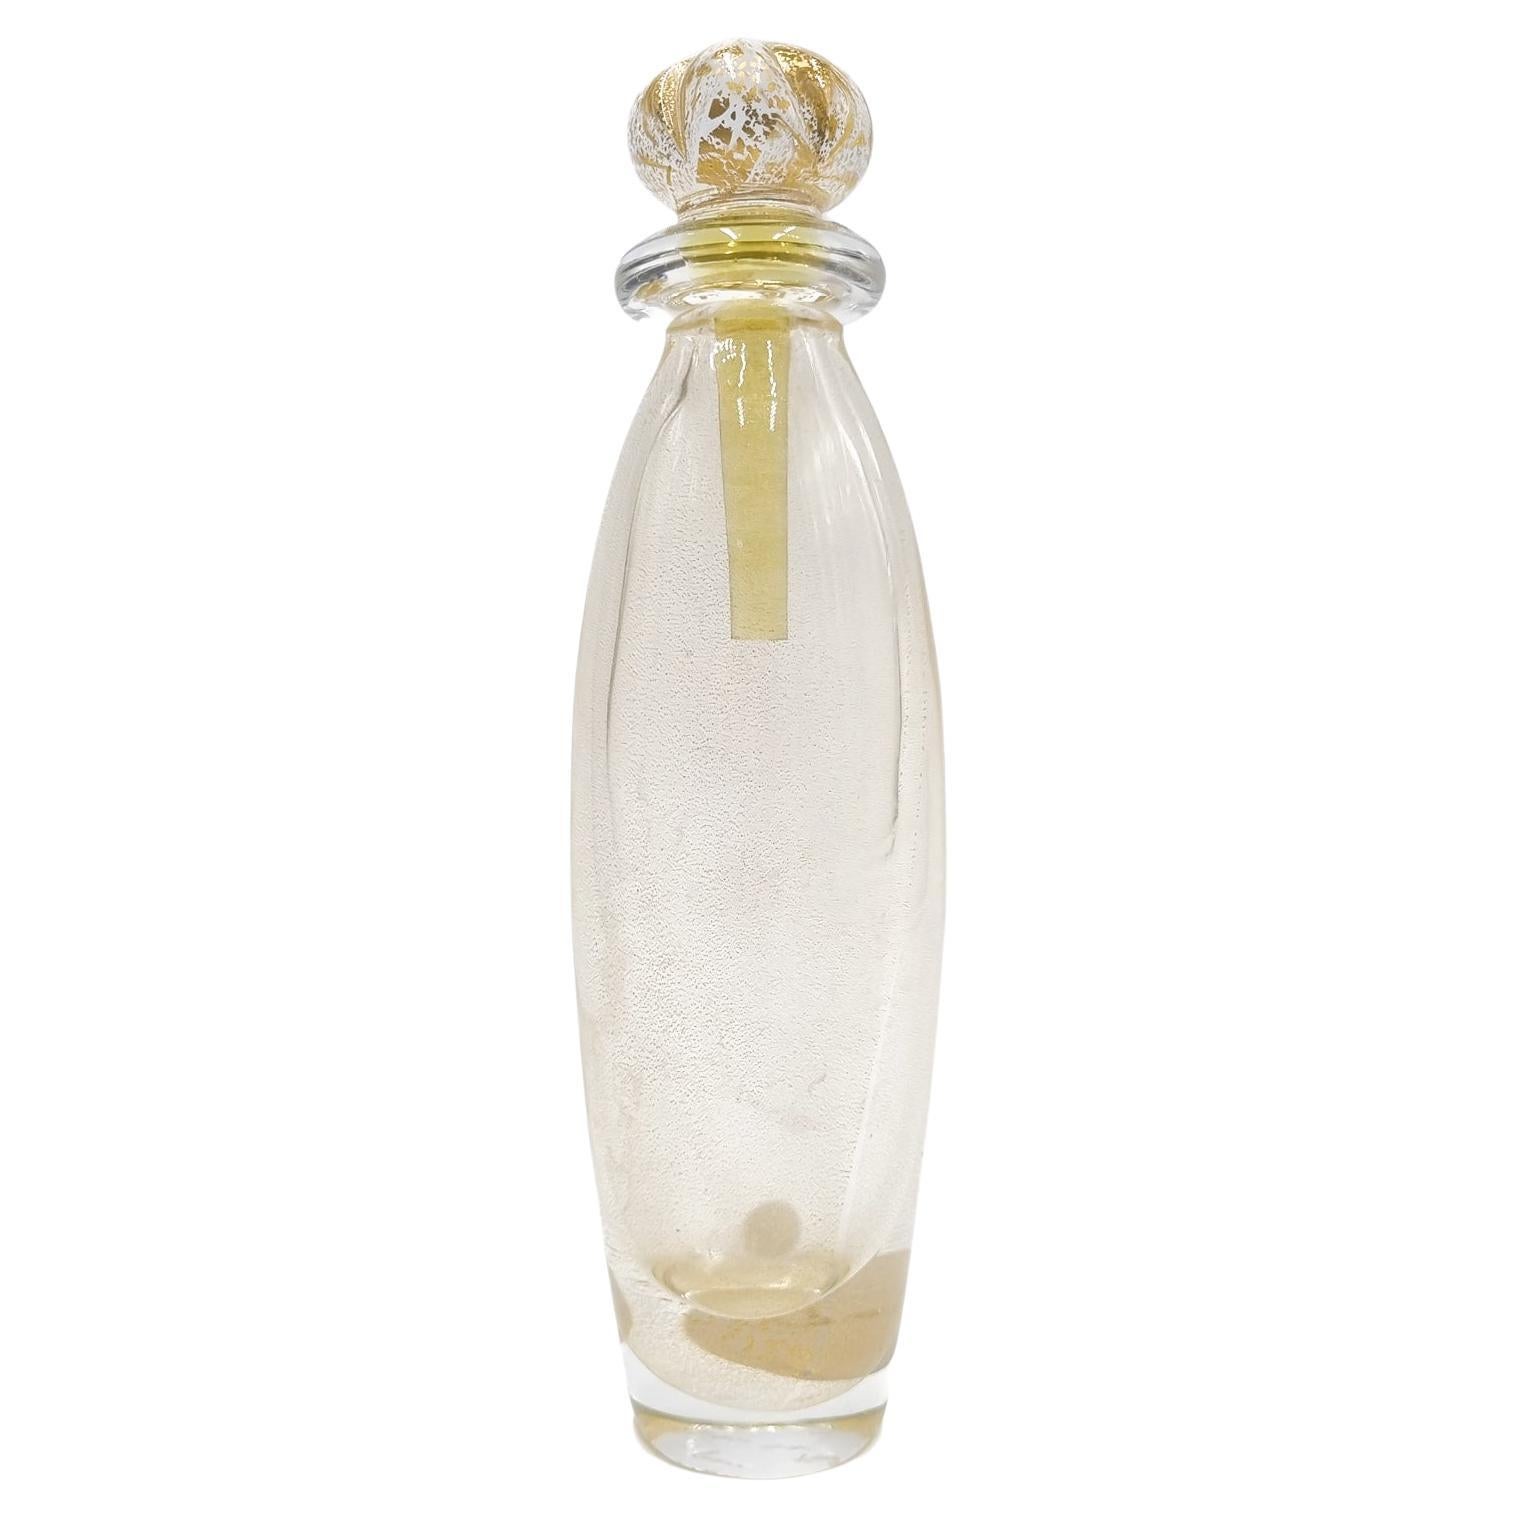 Golden Murano Glass Bottle by Carlo Moretti from the 1970s For Sale